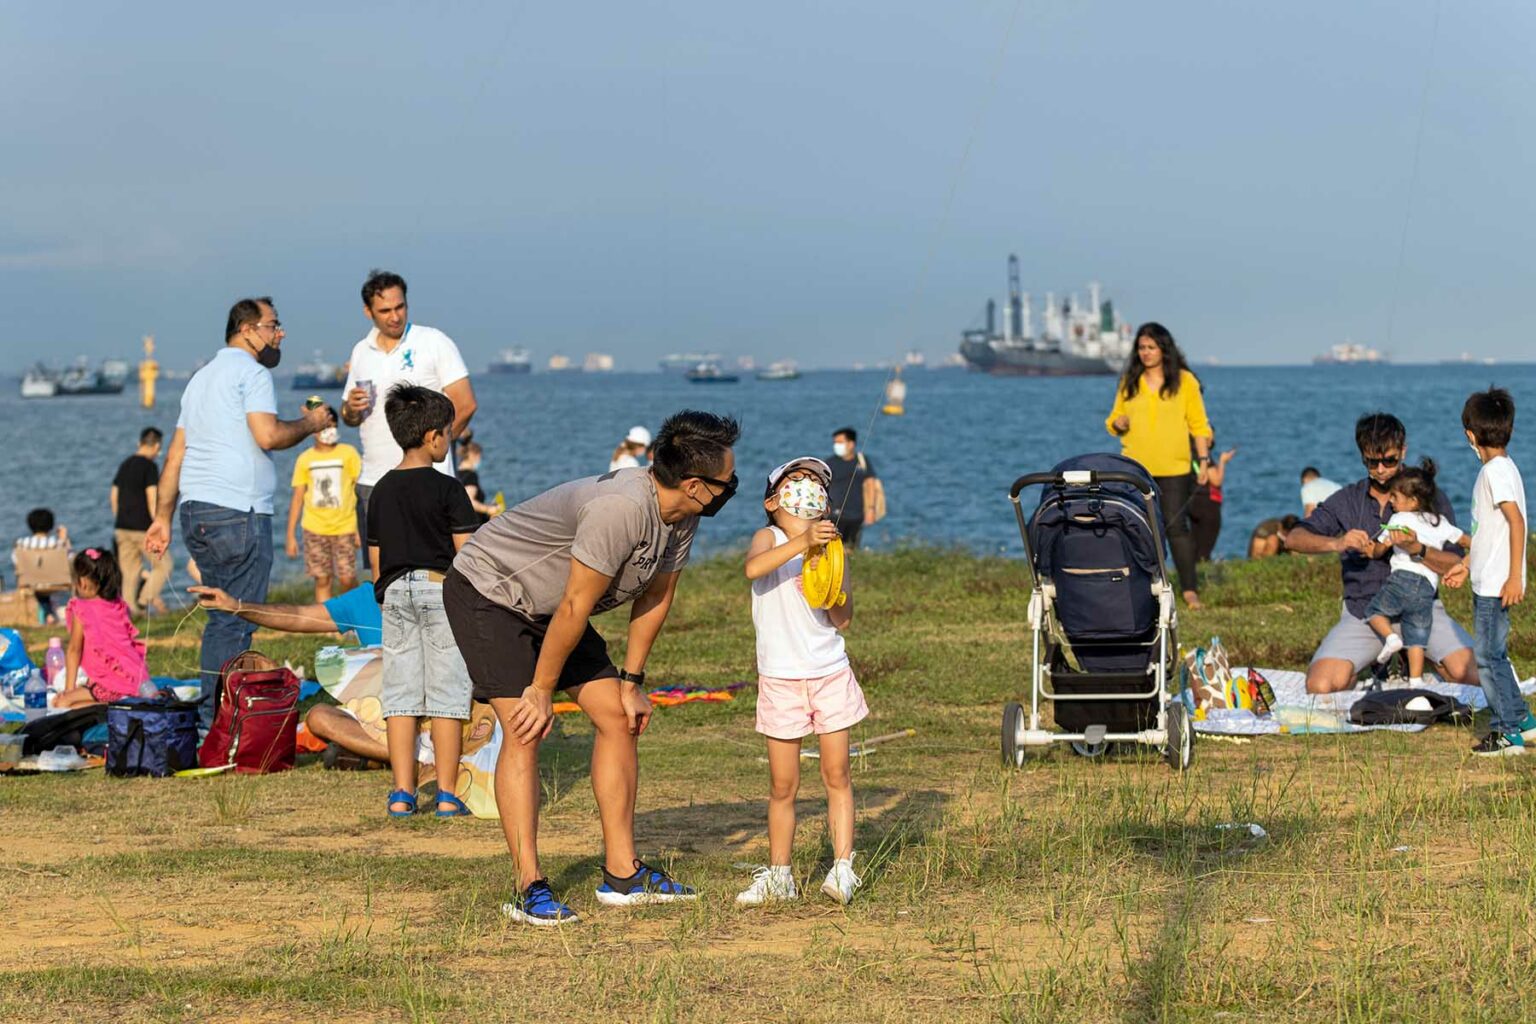 Families are having a picnics and flying kites at Marina Barrage in Singapore